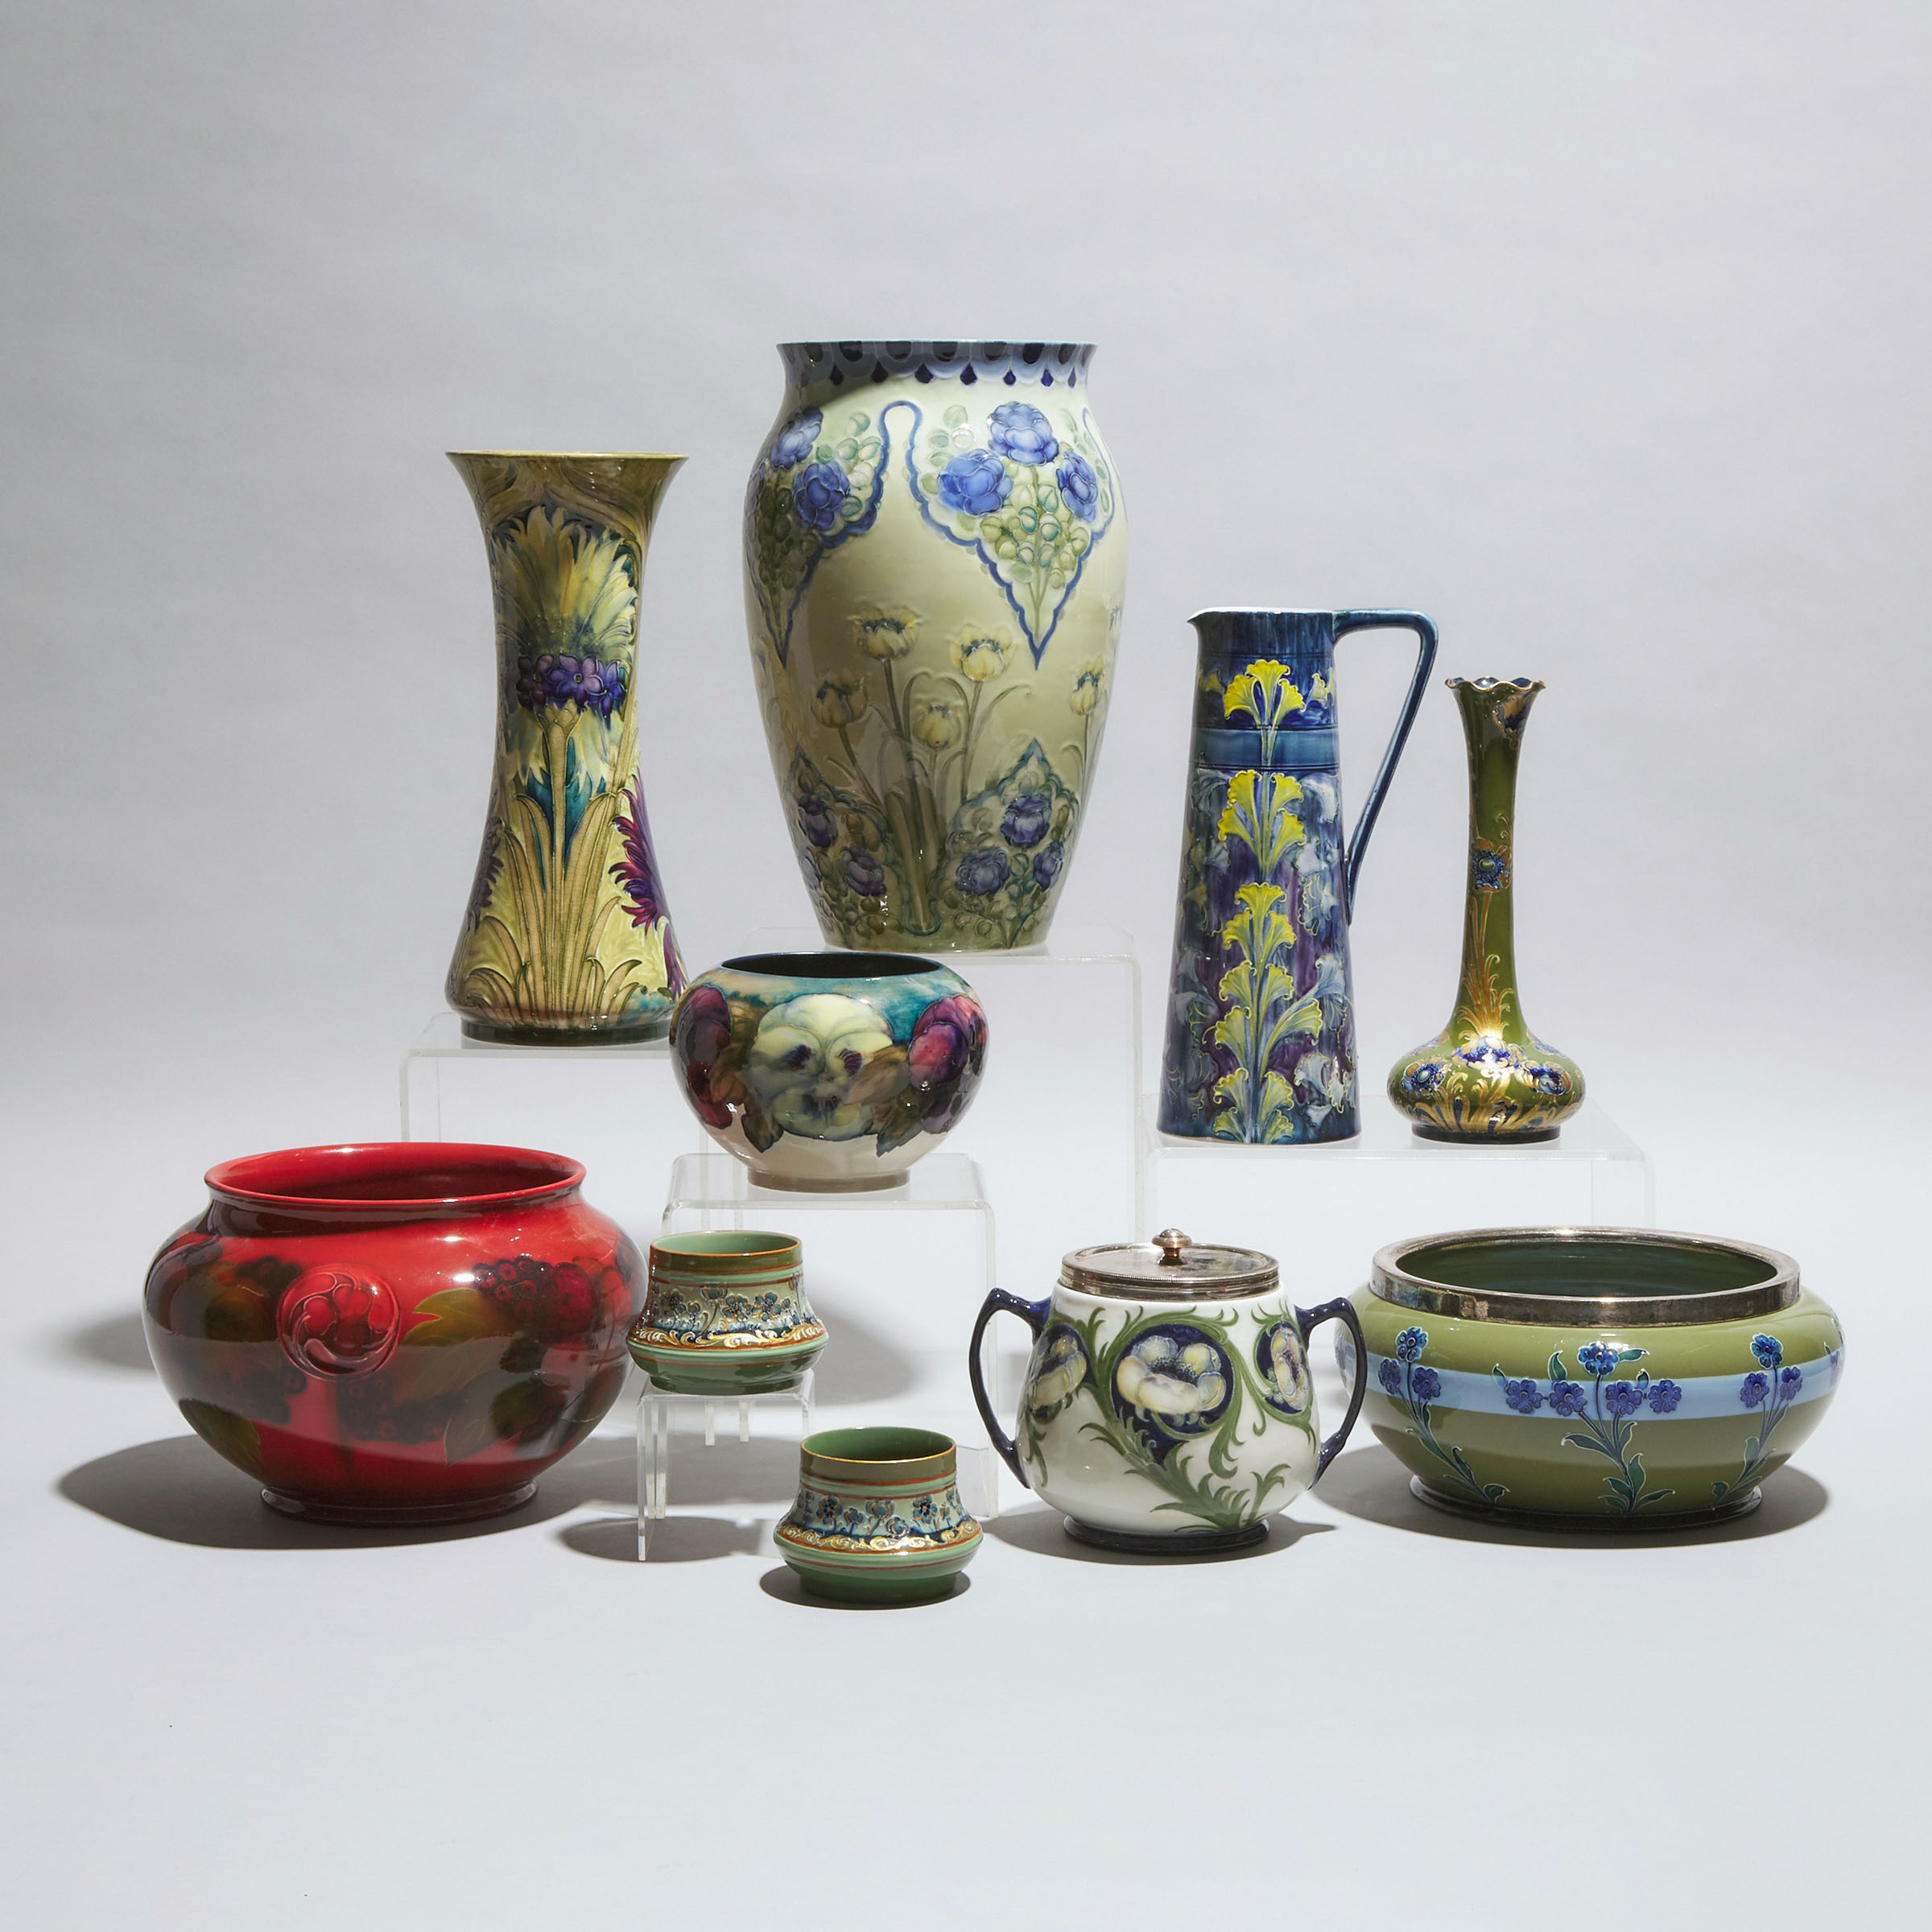 Group of Mainly Macintyre Moorcroft Pottery, c.1900-15